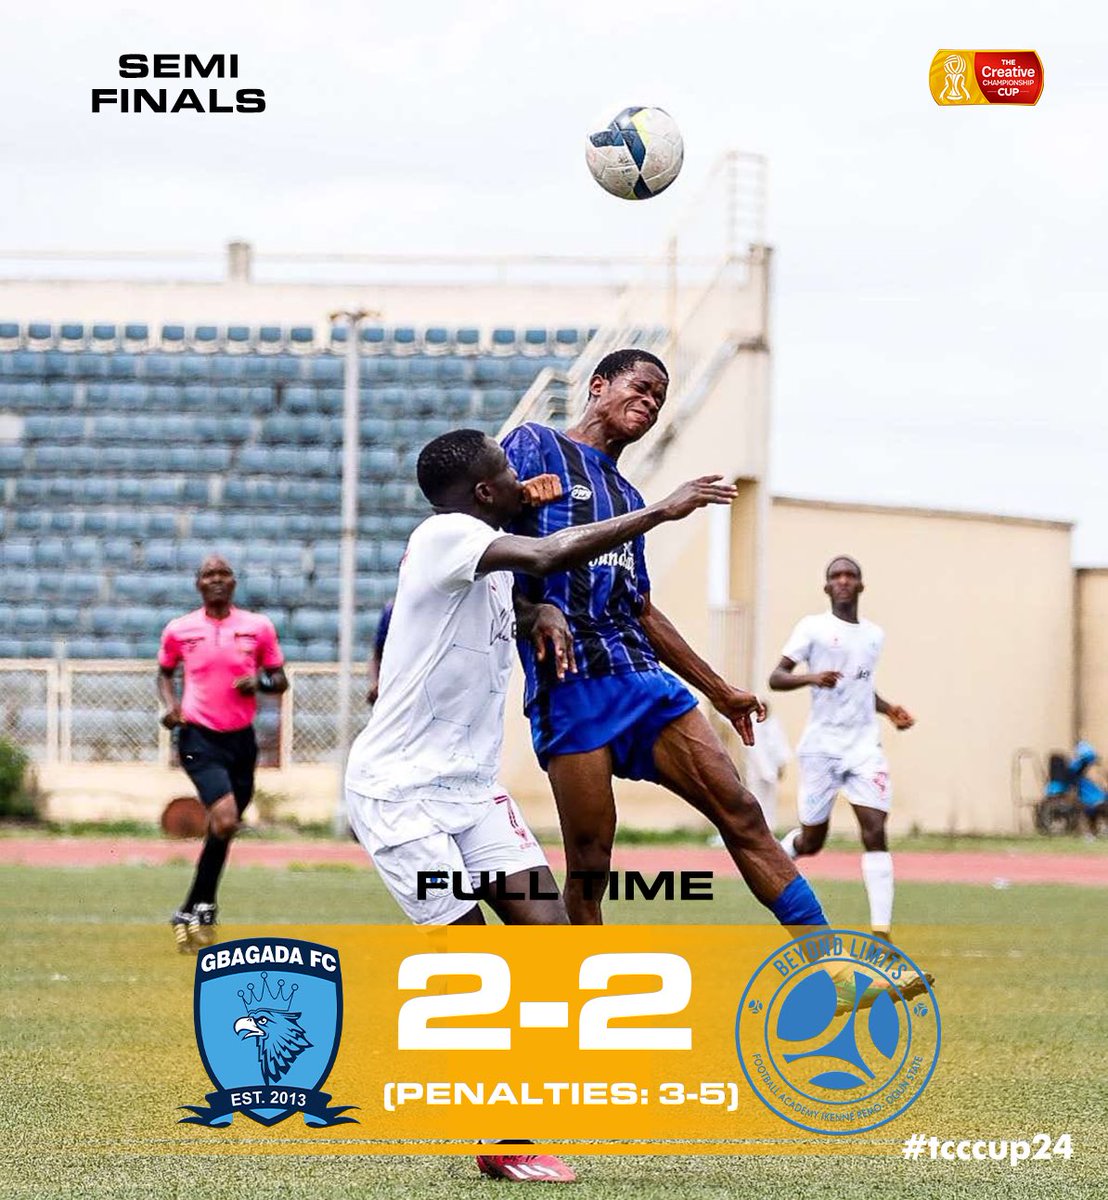 Beyond Limits advance into the TCC Cup final, defeating Gbagada via penalties. This is their third final in the competition as they look to win it for the first time. #GBABYL #TCCCup24